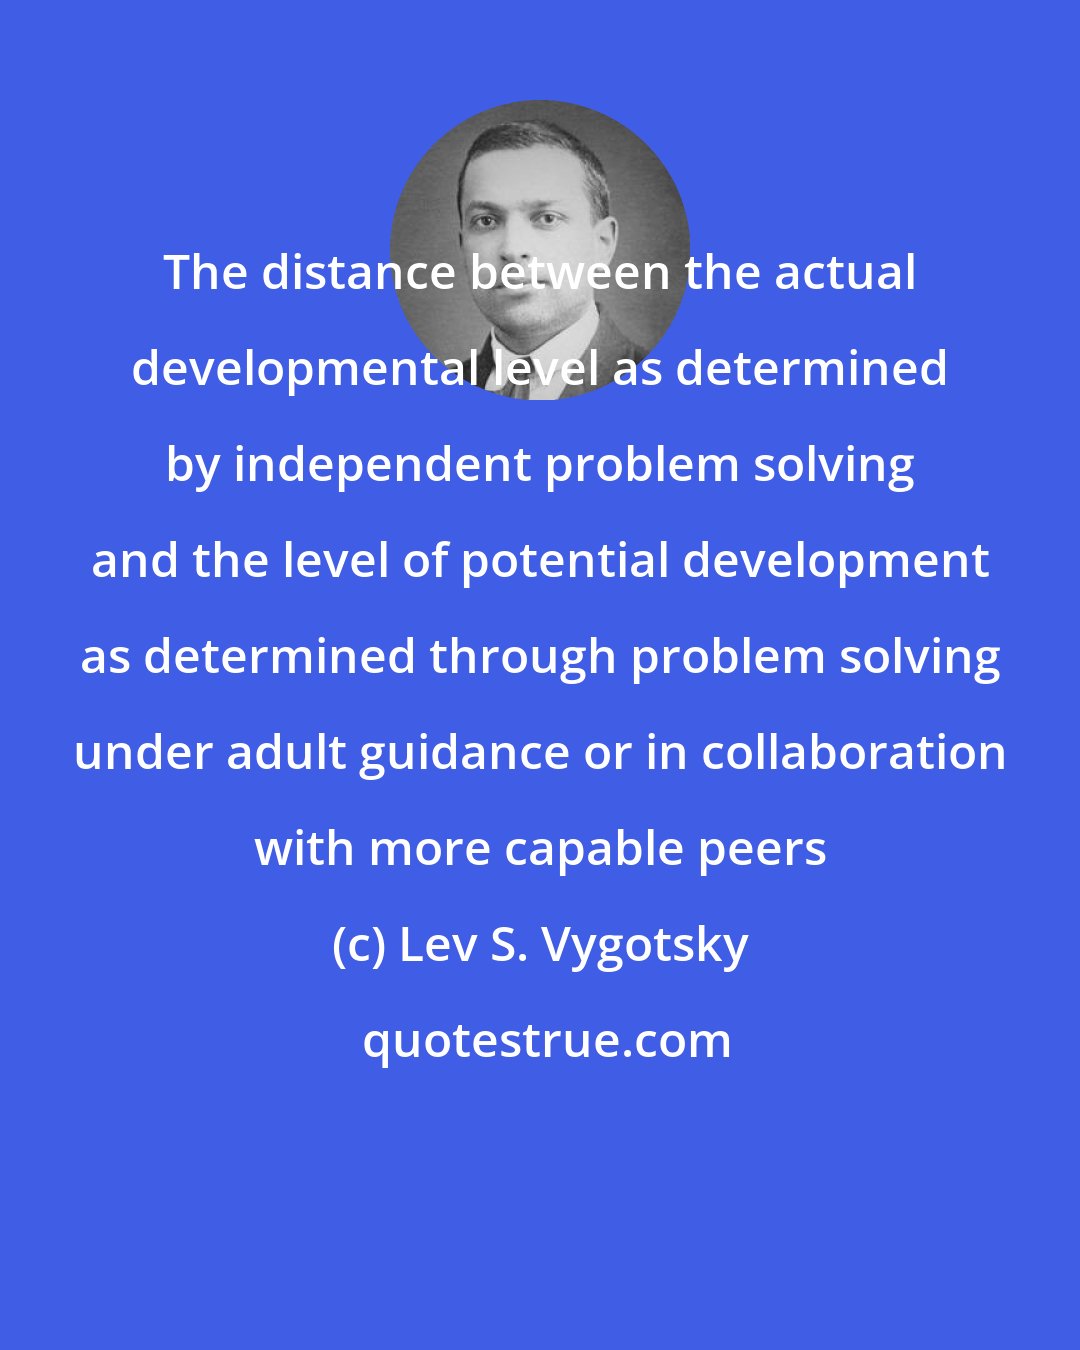 Lev S. Vygotsky: The distance between the actual developmental level as determined by independent problem solving and the level of potential development as determined through problem solving under adult guidance or in collaboration with more capable peers